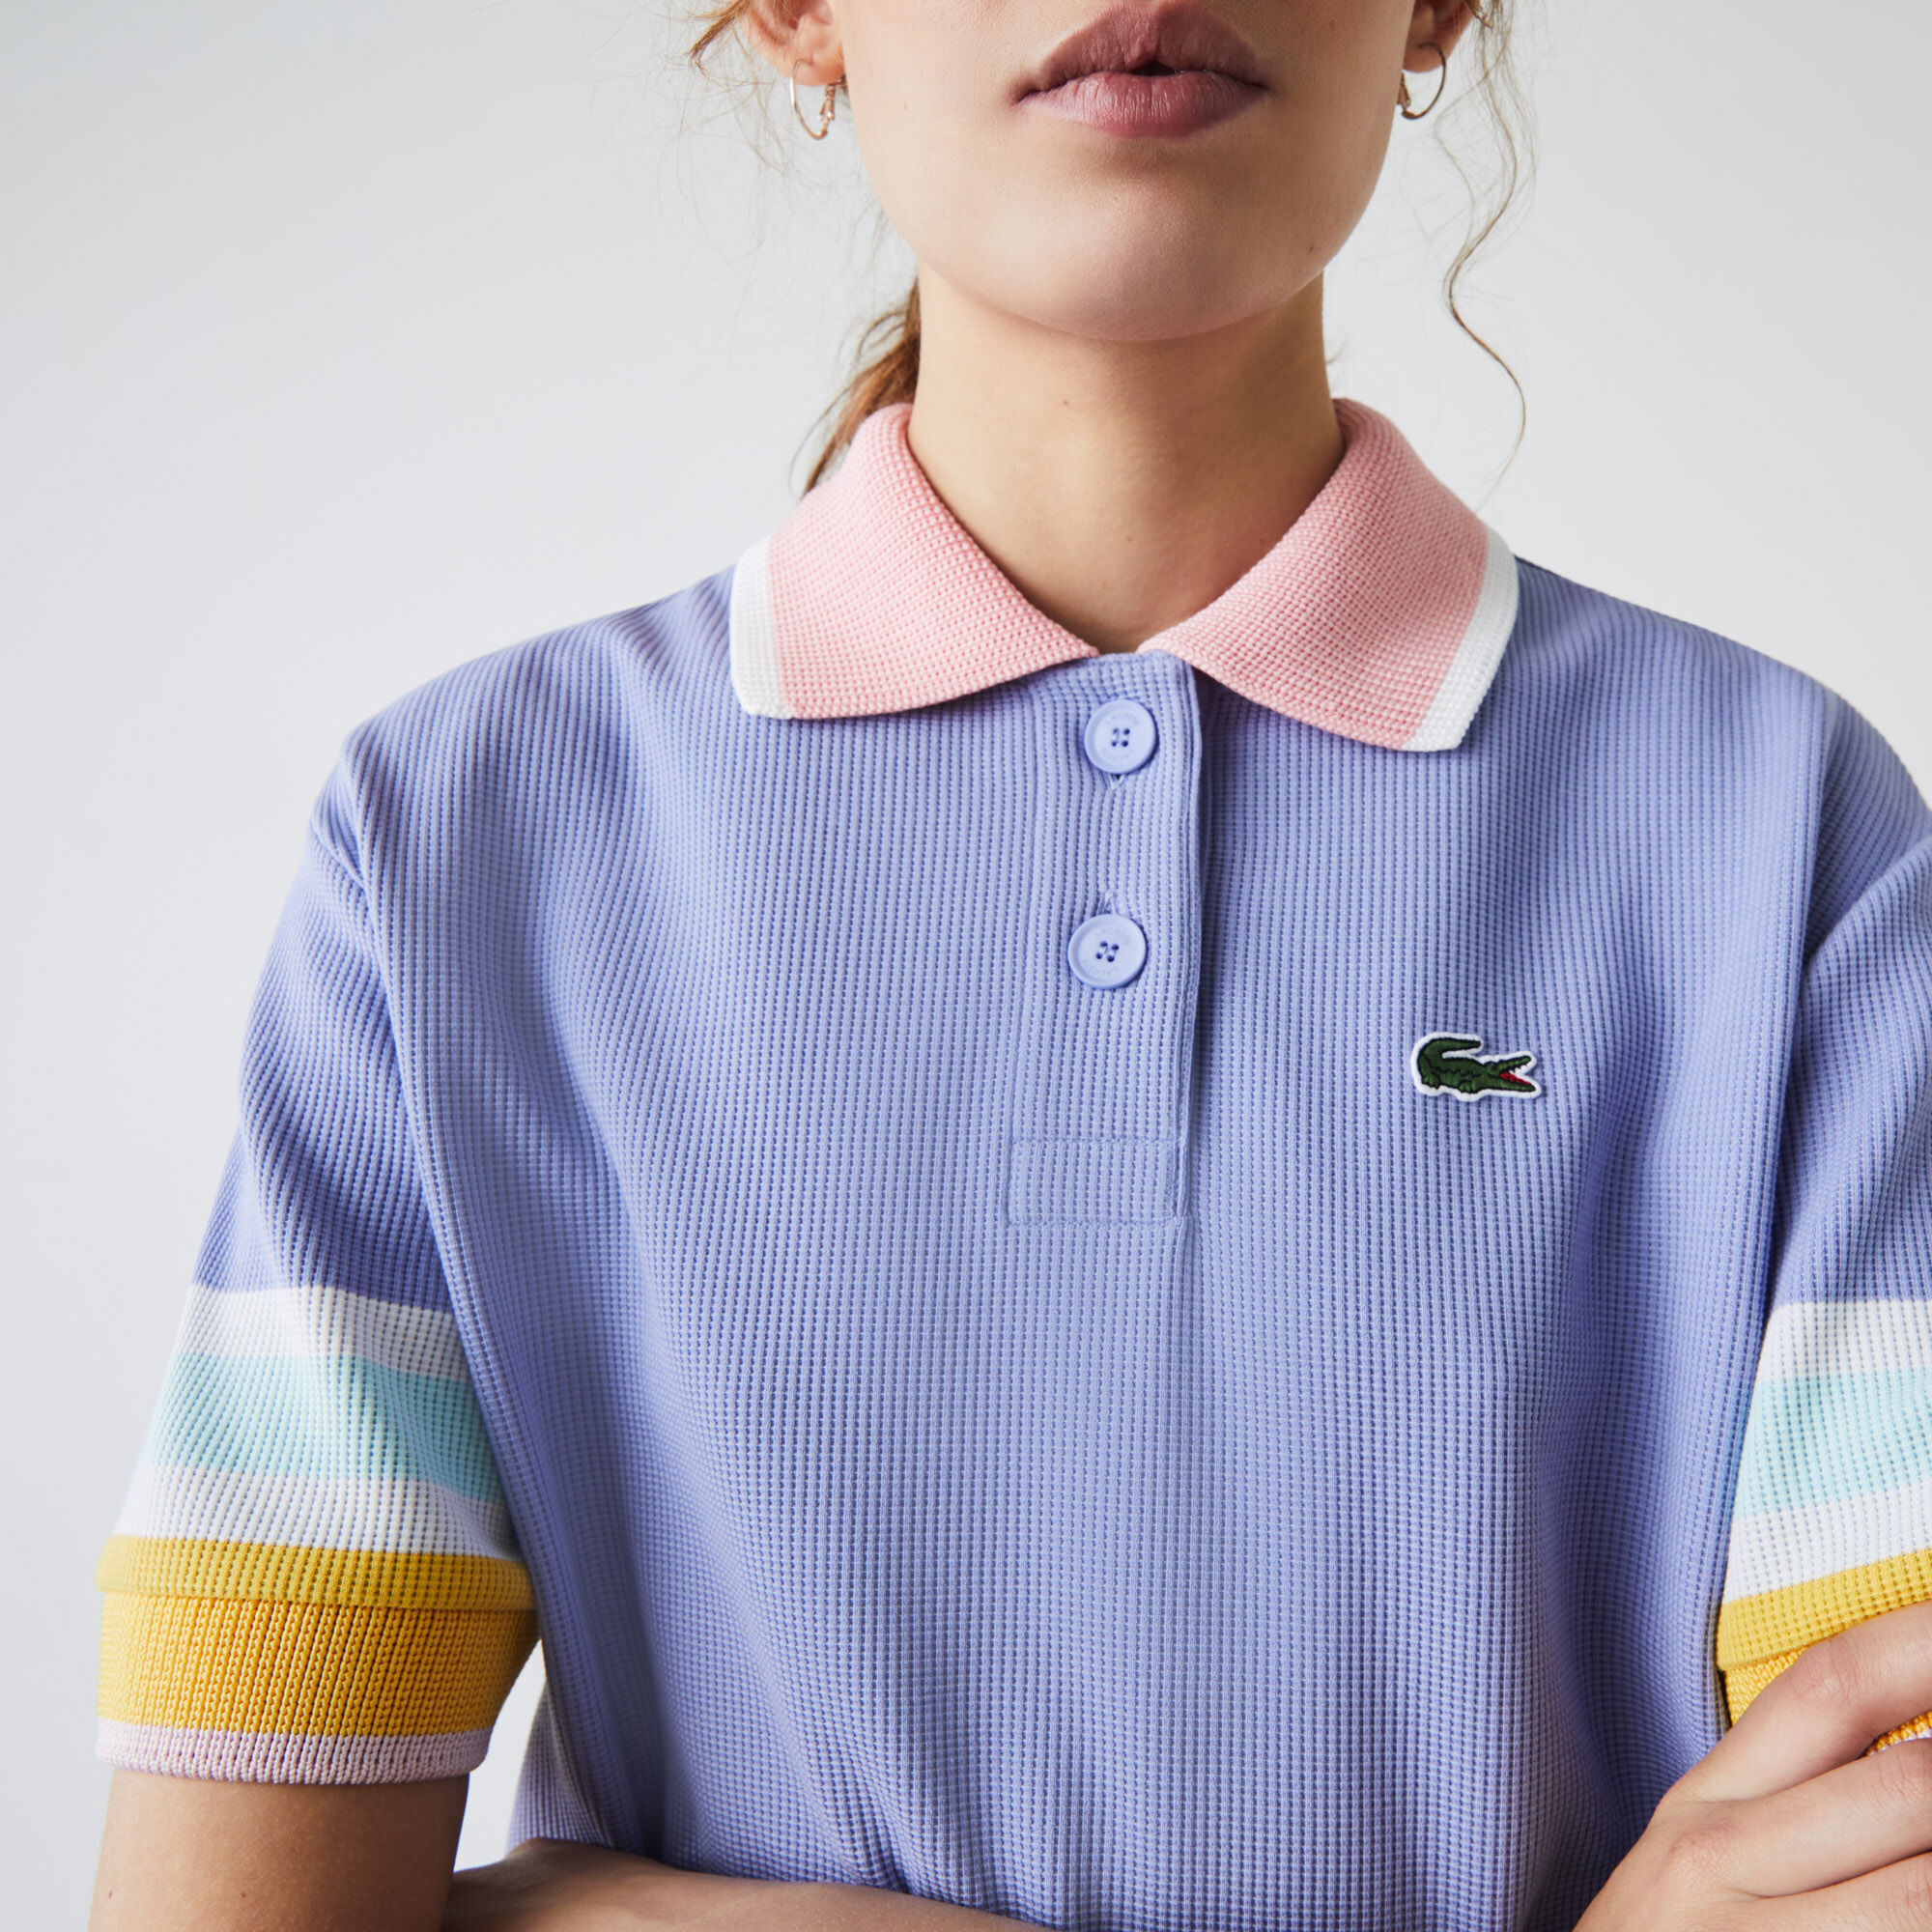 Women’s Lacoste Striped Sleeve Textured Cotton Polo Shirt